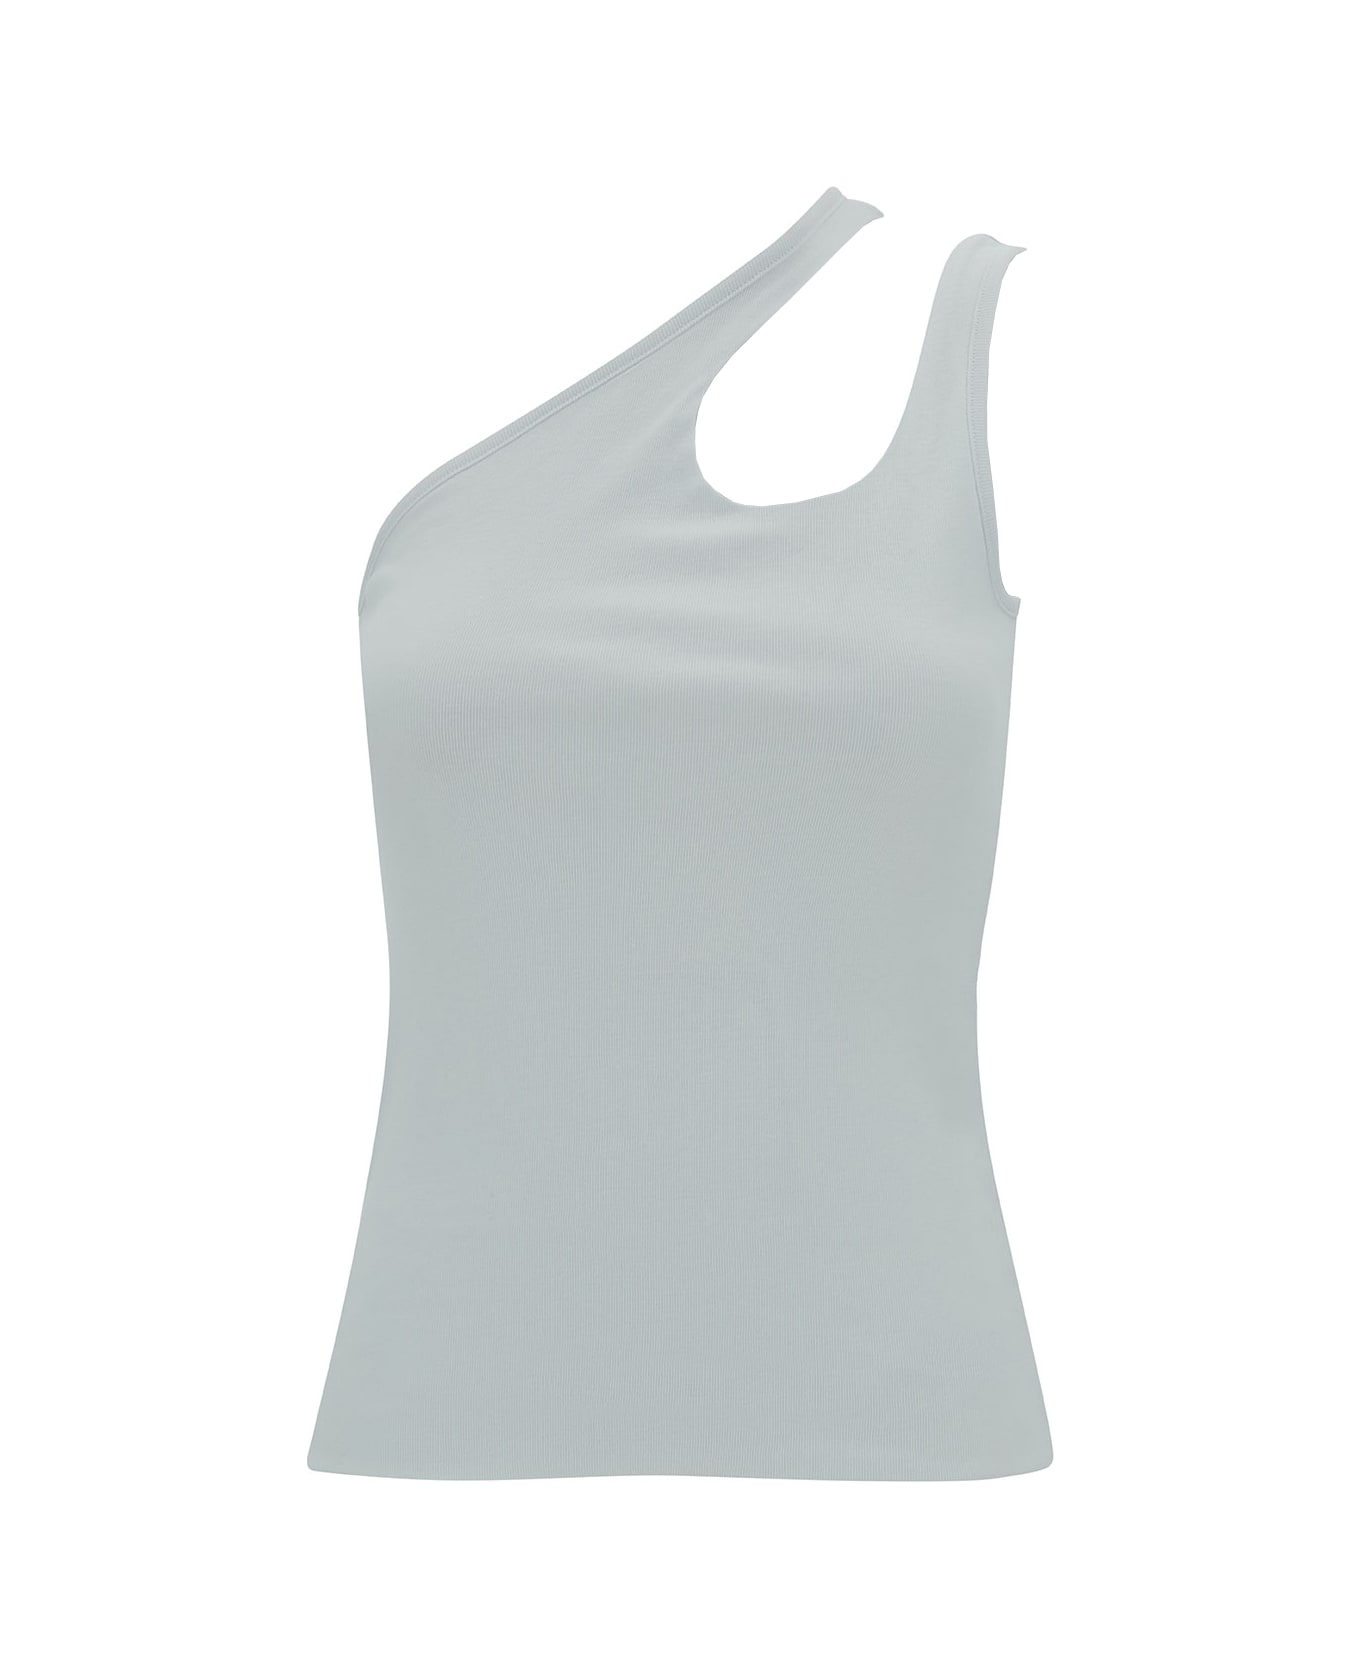 Federica Tosi White One-shoulder Top With Cut-out In Ribbed Cotton Woman - White タンクトップ